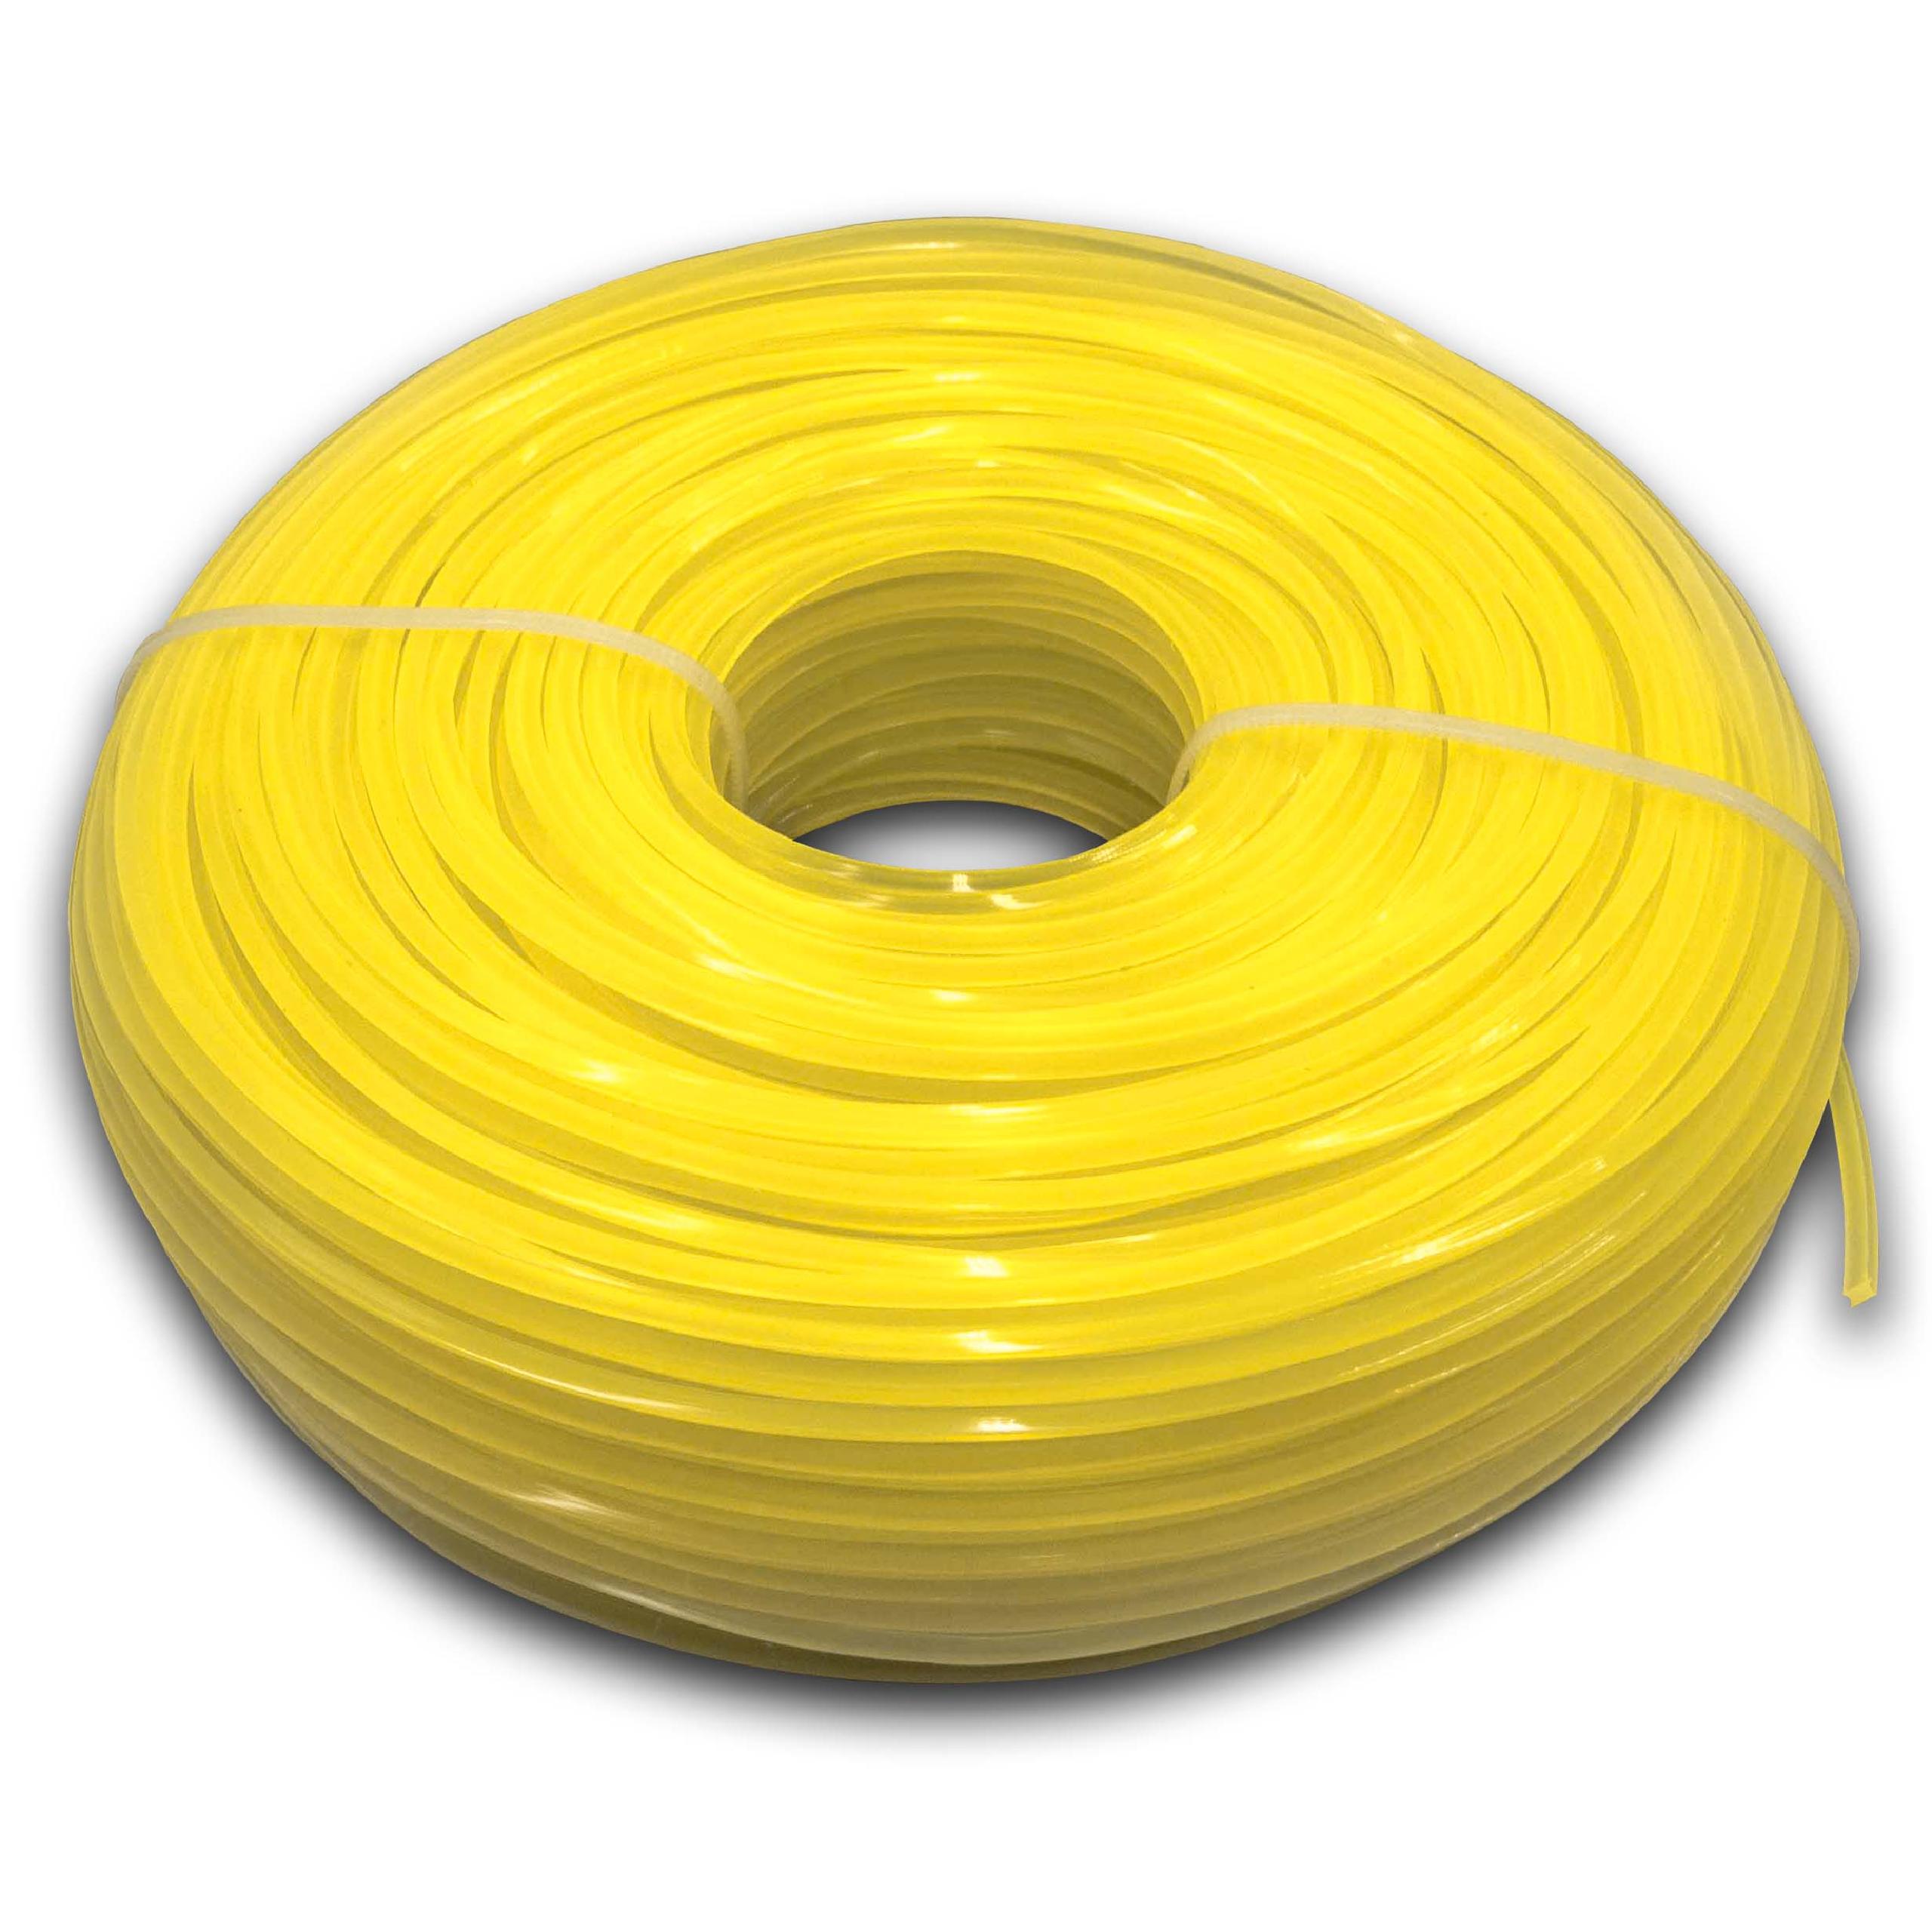 Line suitable for Bosch Makita Lawn Mower, Grass Trimmer - Trimmer Line Yellow, 2.4 mm x 88 m, Square